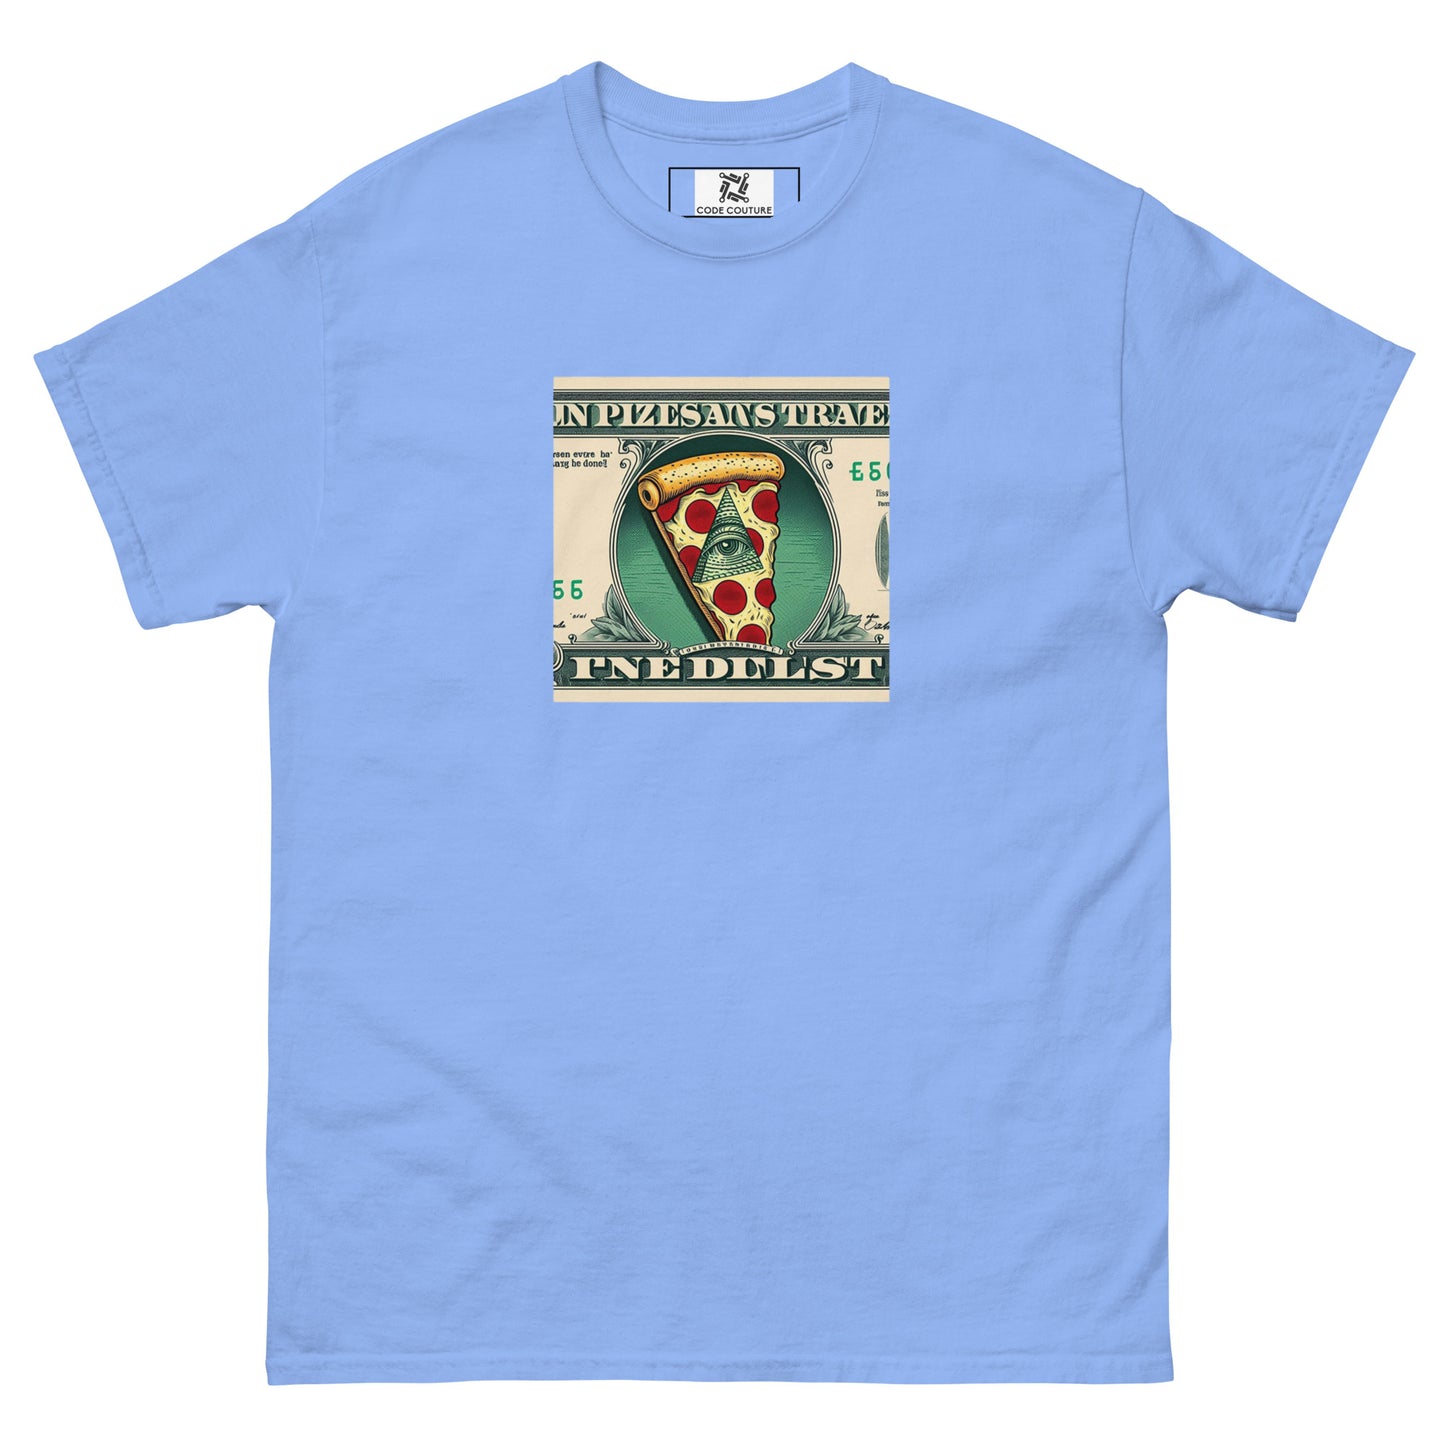 All Seeing Pizza tee